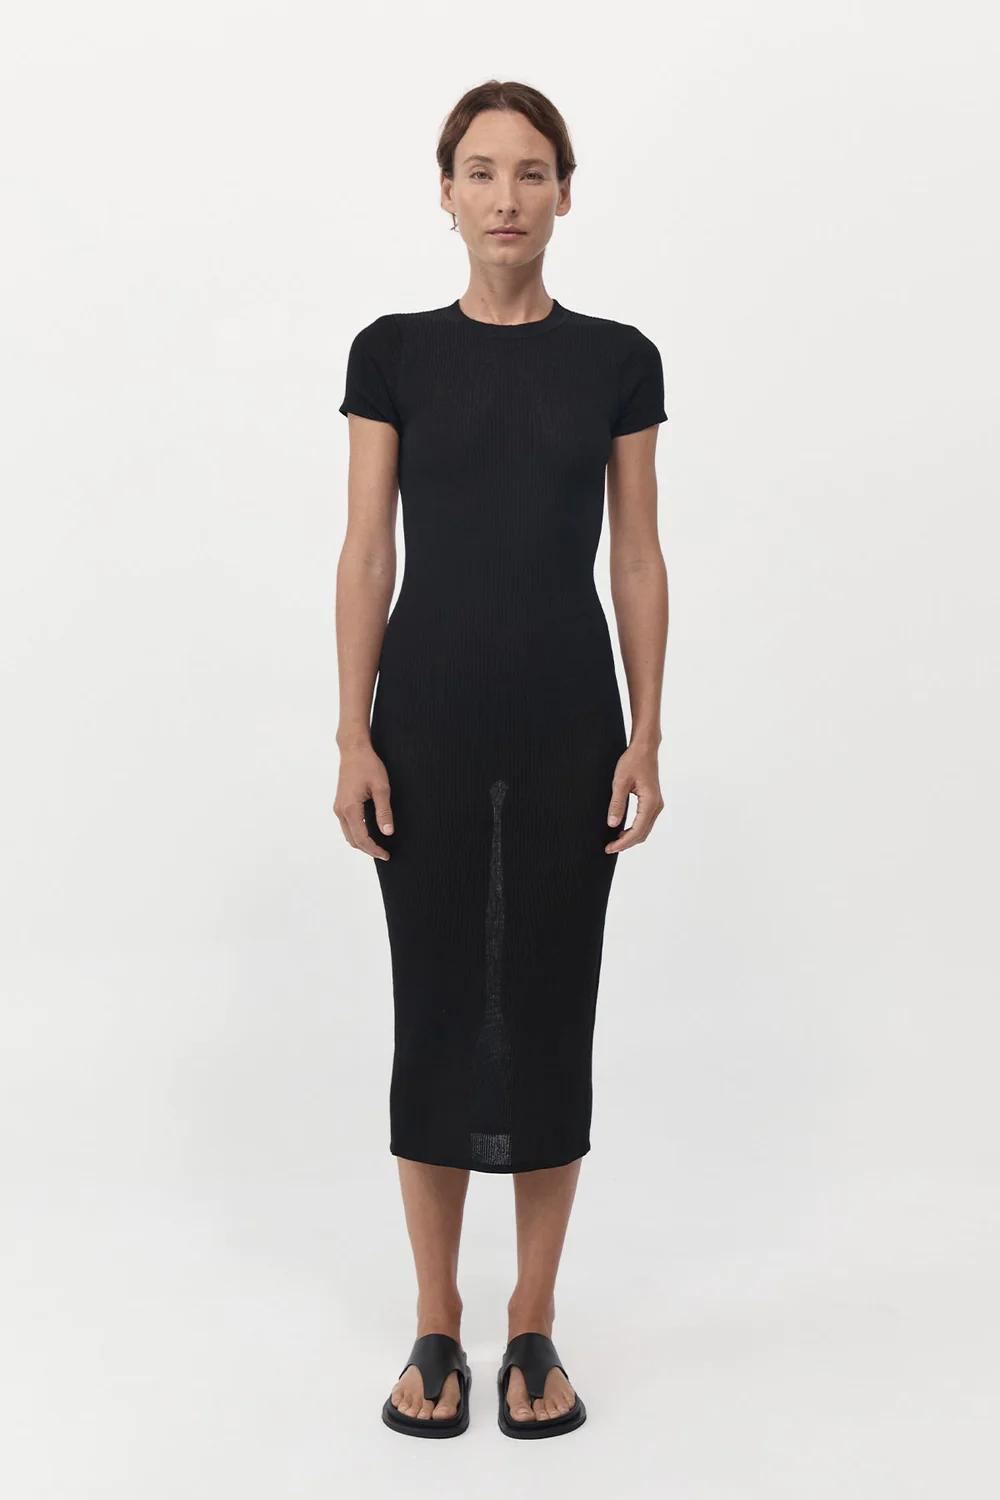 Product Image for Cut Out Knit Dress, Black